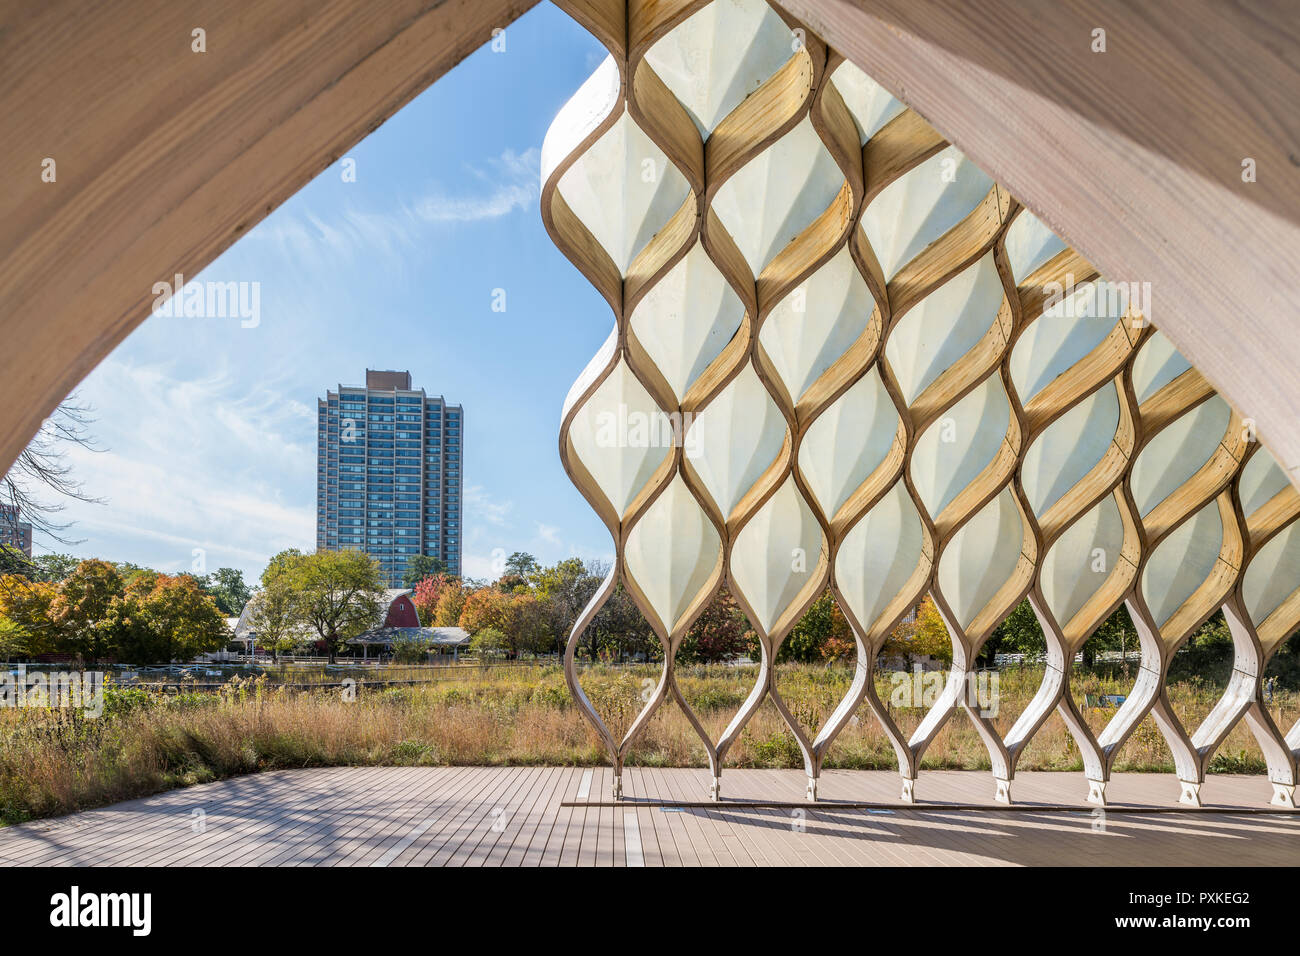 People's Gas Education Pavilion in Lincoln Park - designed by Studio Gang Stock Photo